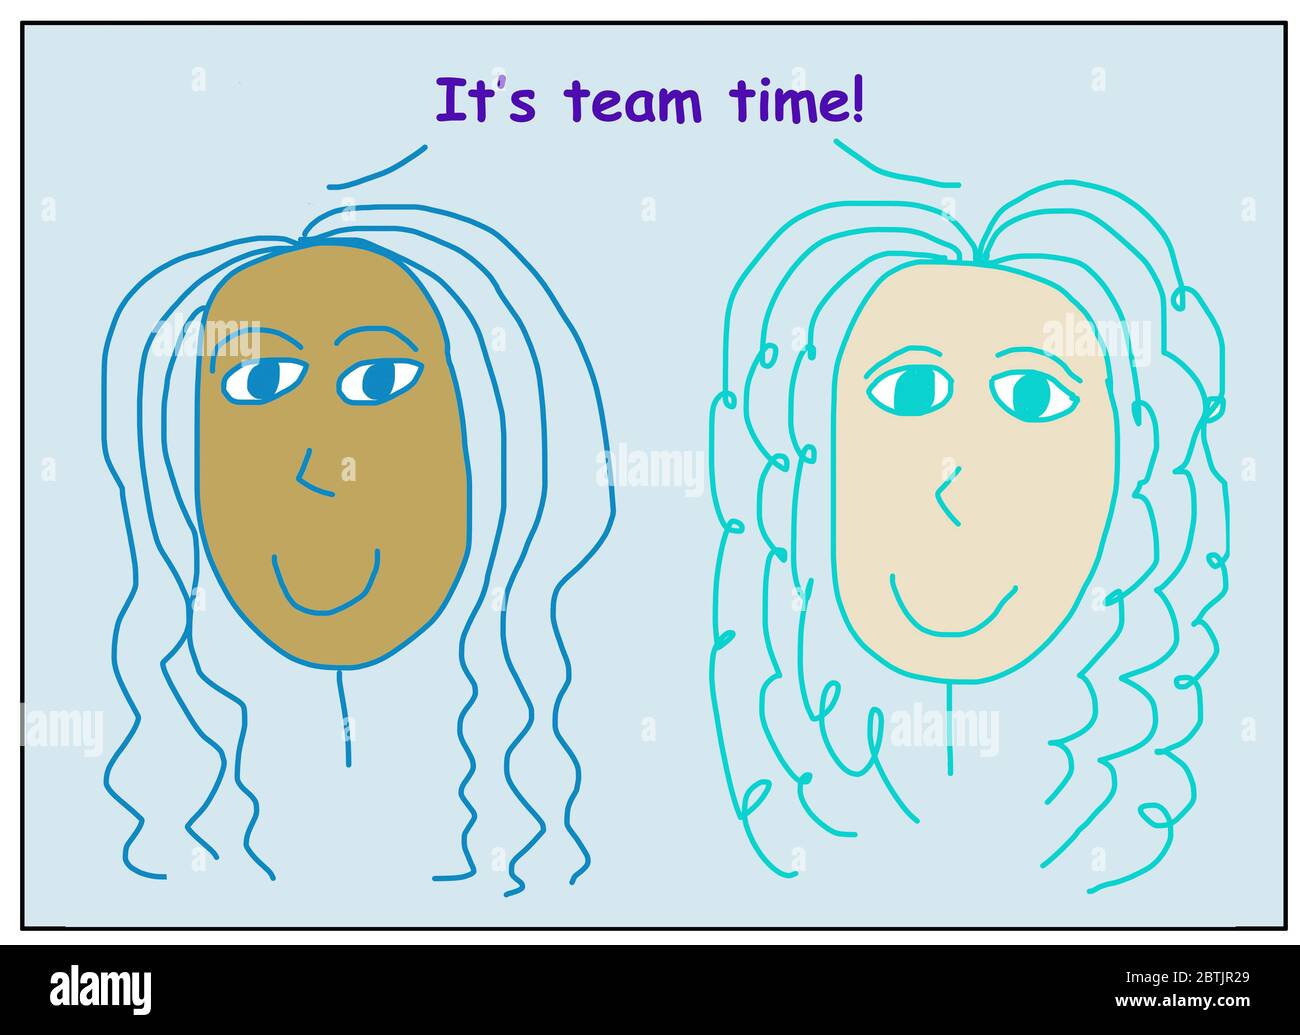 Inspirational cartoon of two smiling, beautiful and ethnically diverse women stating it is team time. Stock Photo